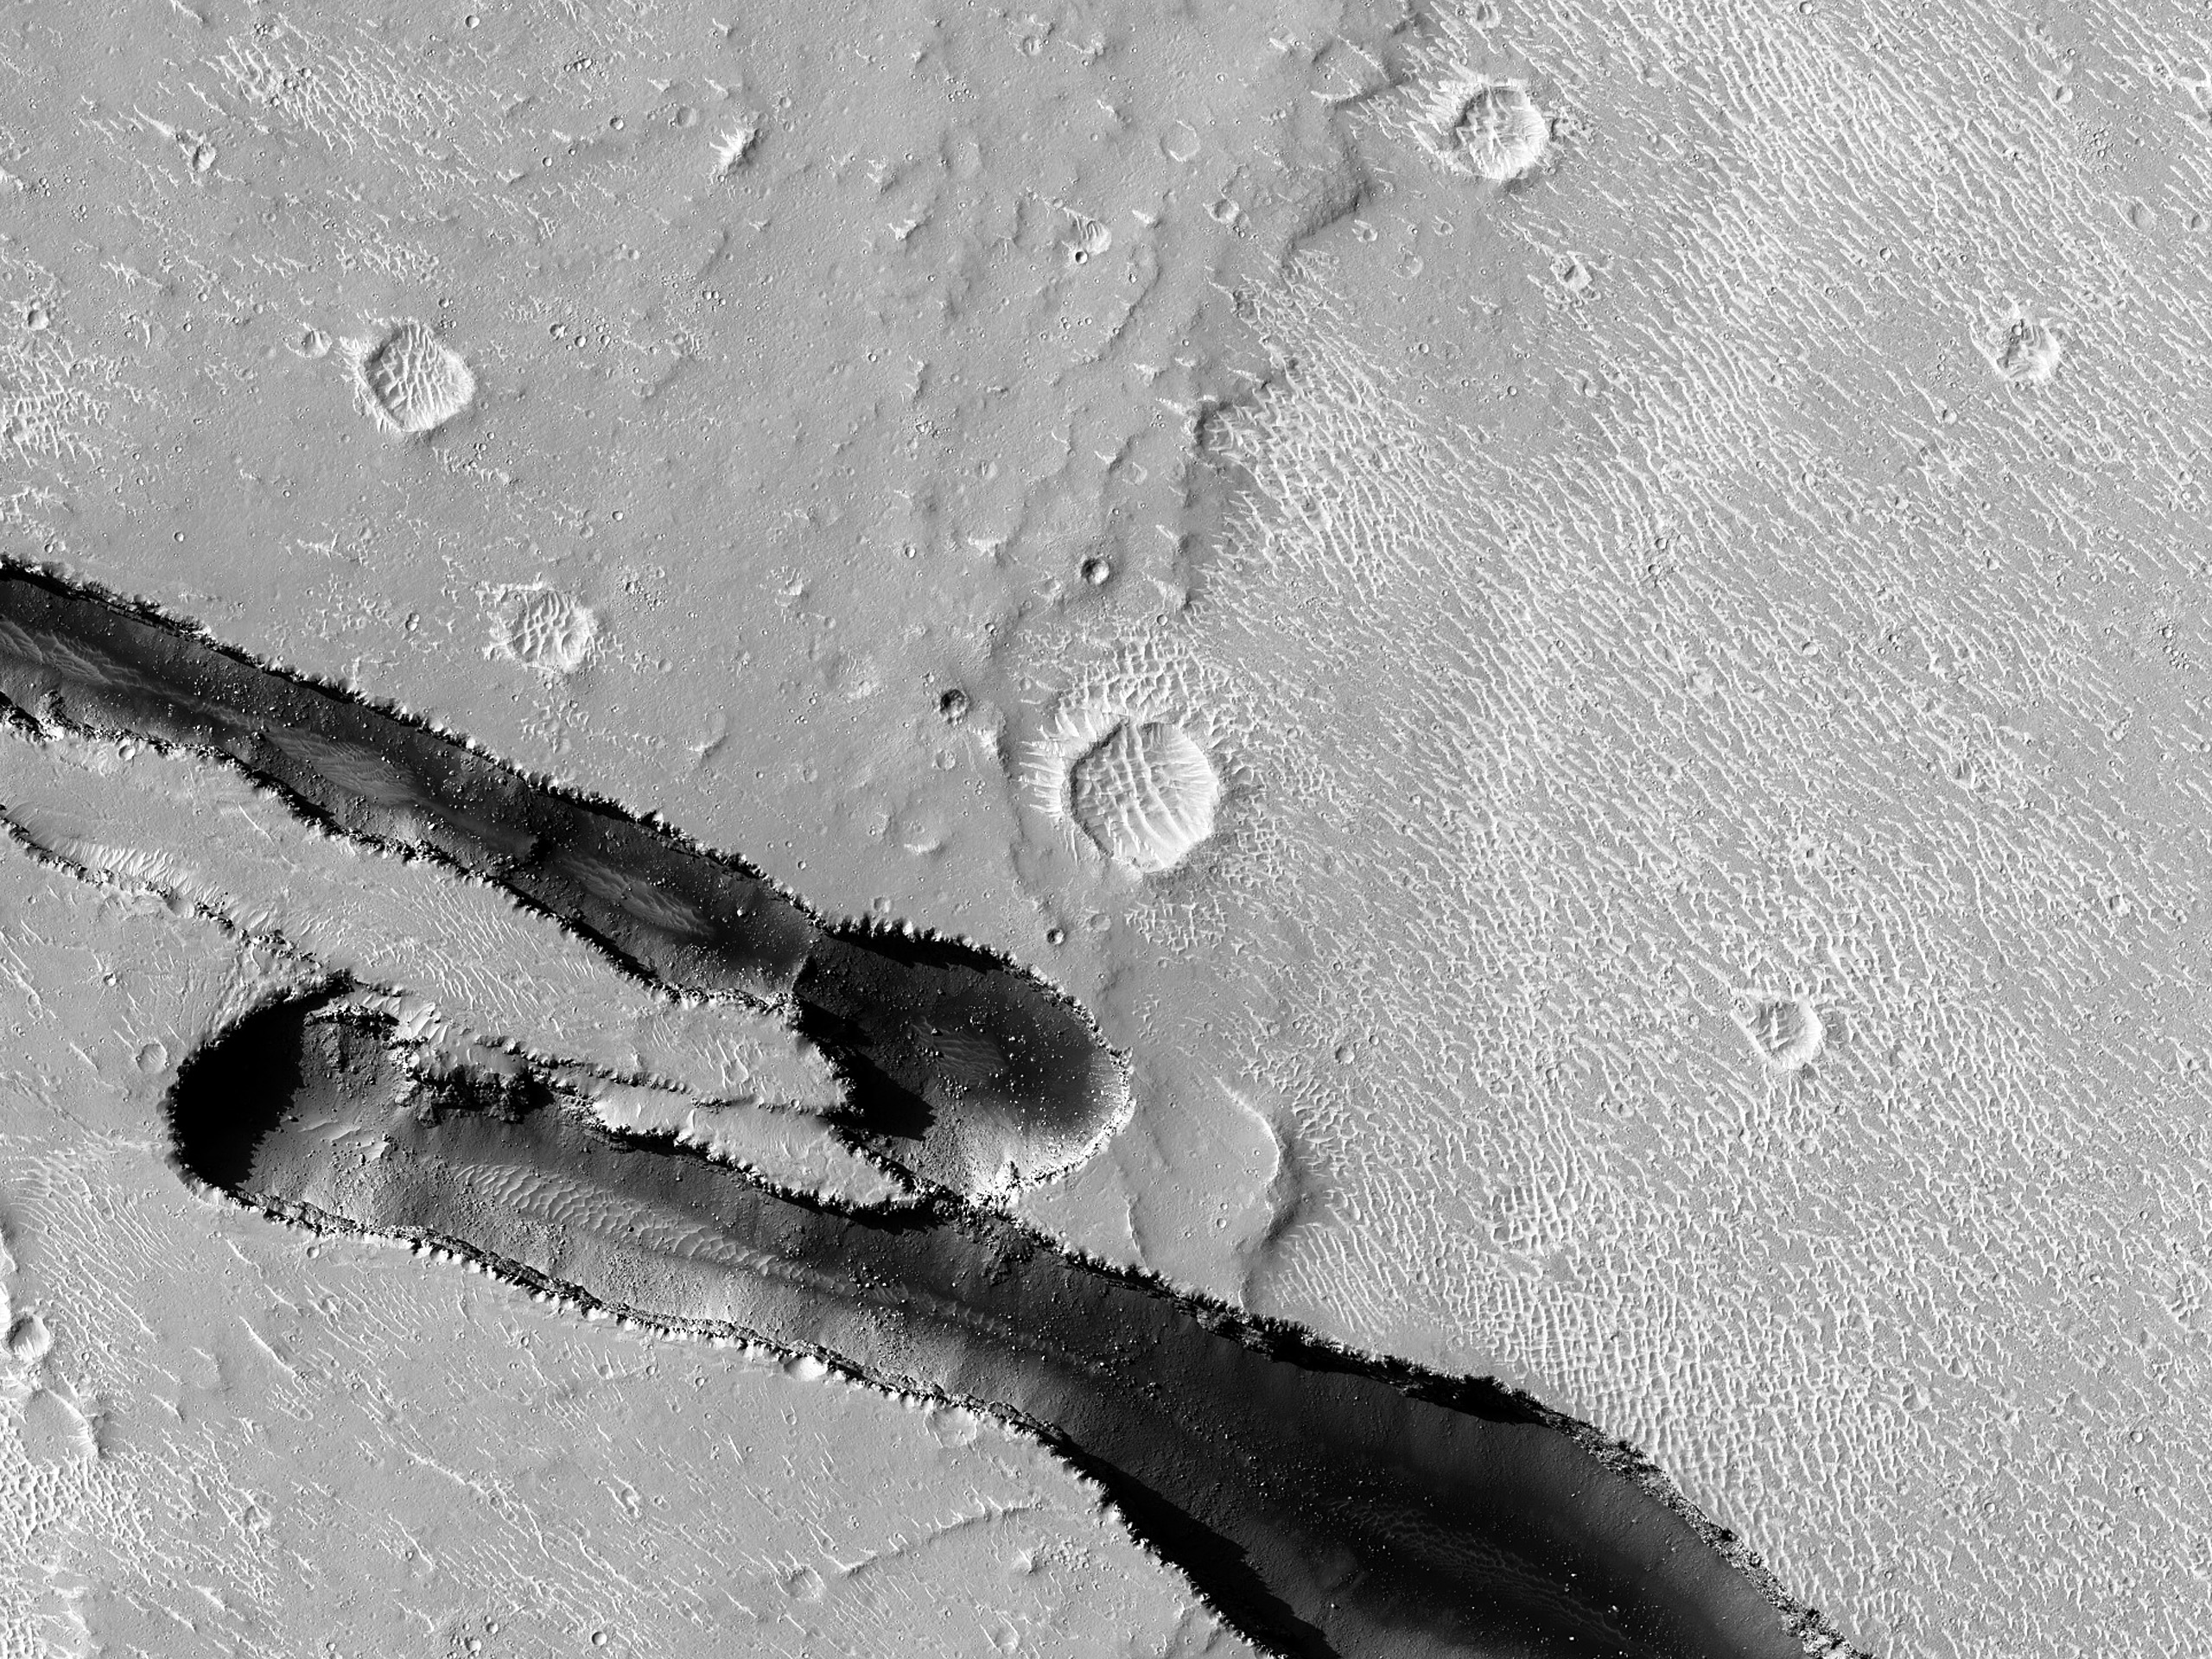 Cerberus Fossae Intersection with Flow Edge